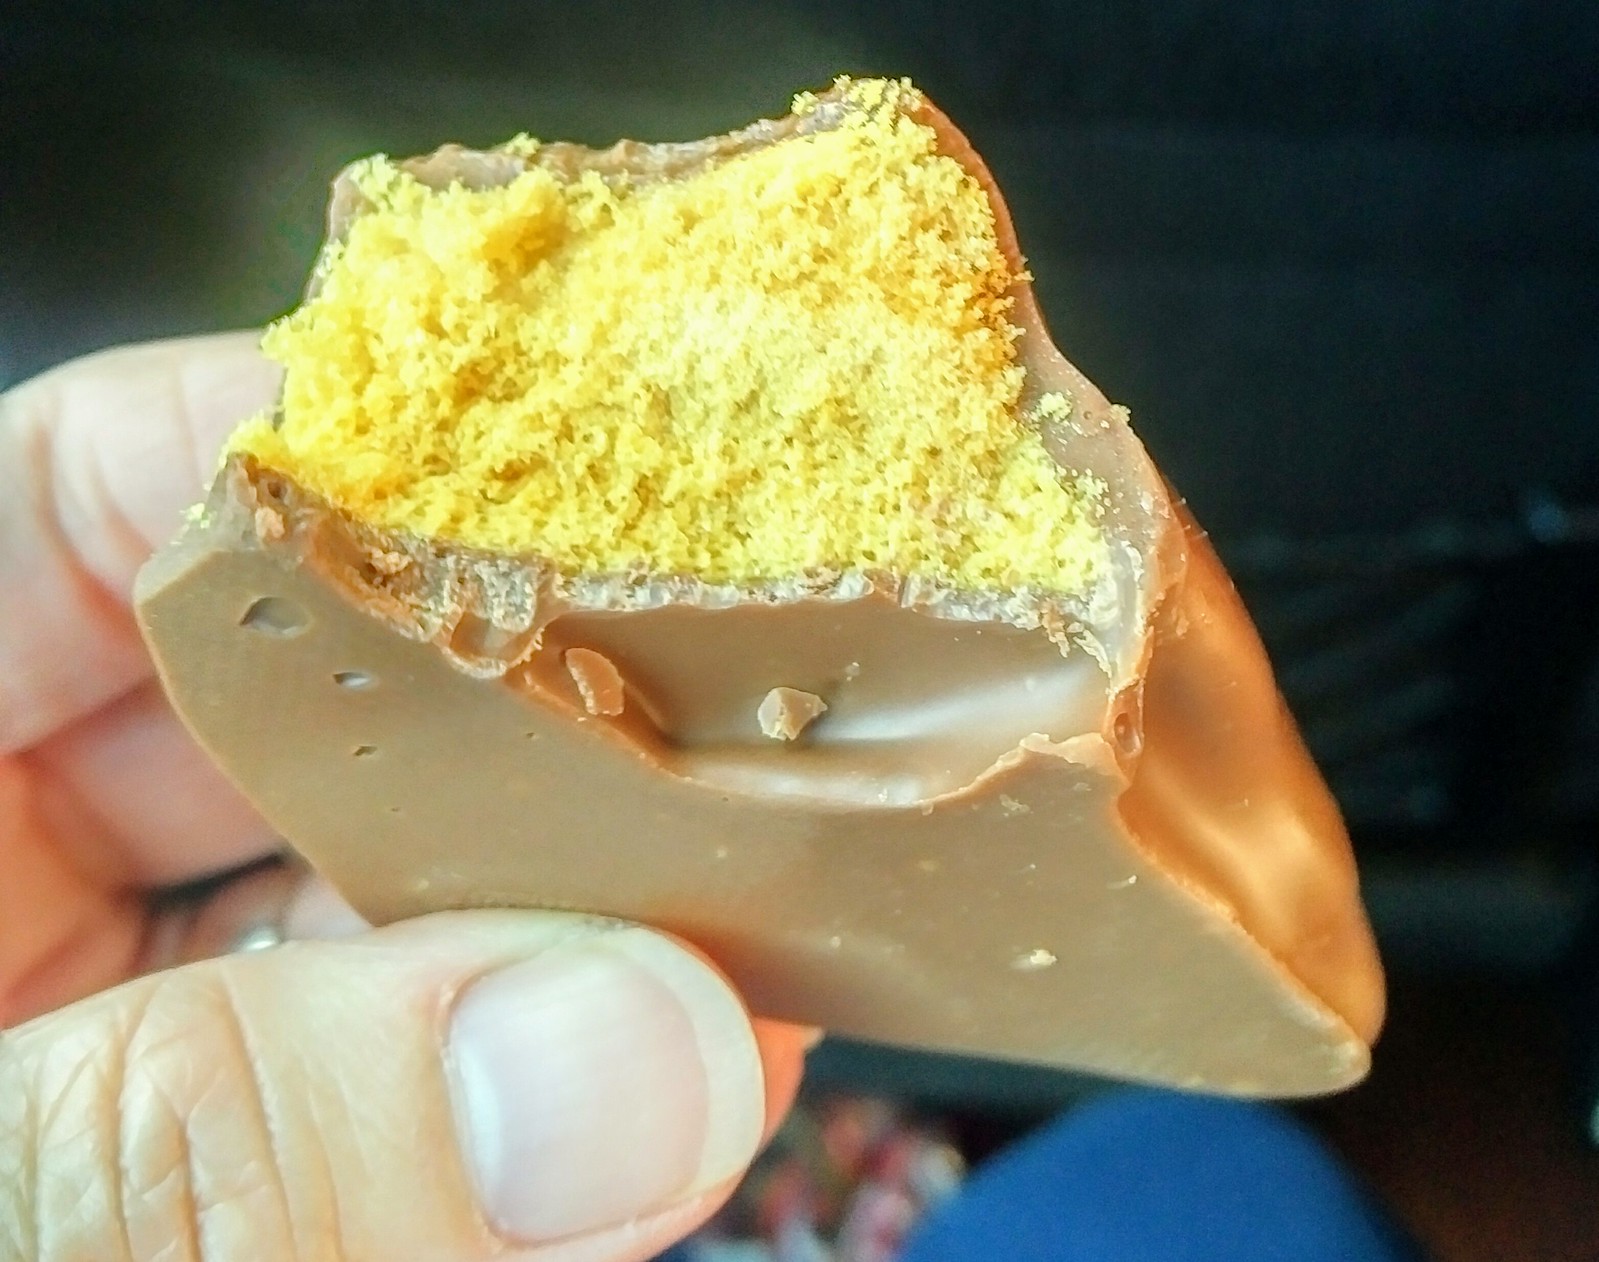 Sponge Candy from Glacier Confection in Tulsa